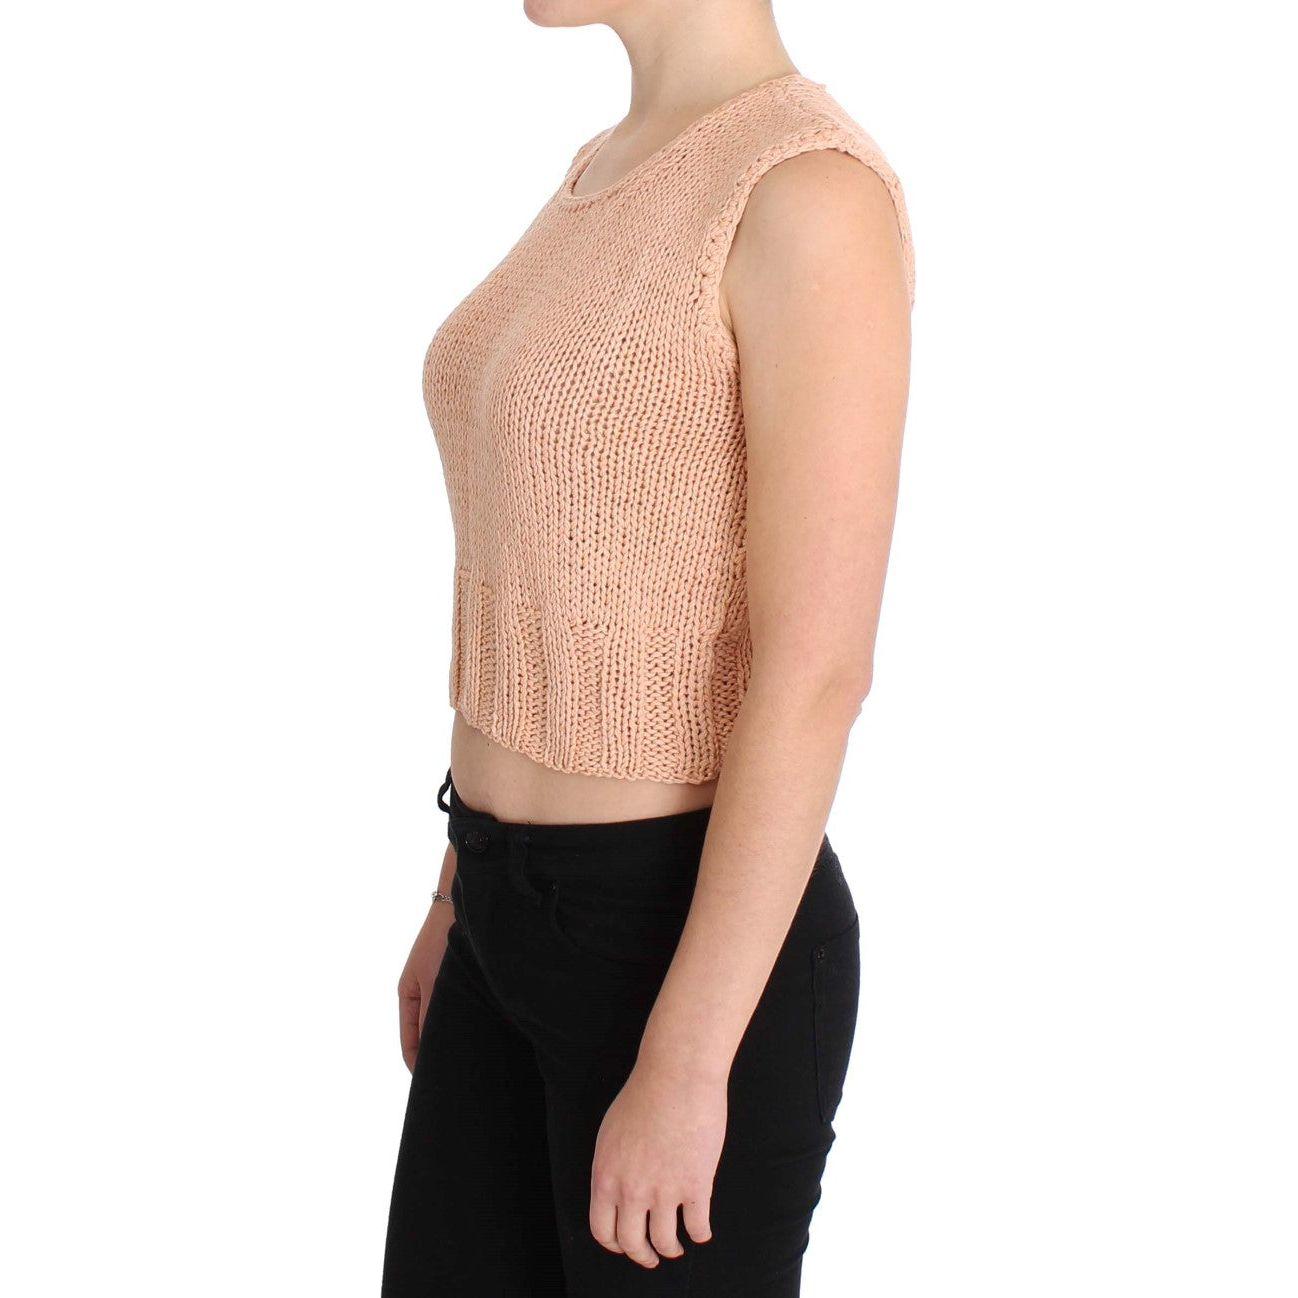 PINK MEMORIES Elegant Pink Knitted Sleeveless Vest Sweater pink-cotton-blend-knitted-sleeveless-sweater